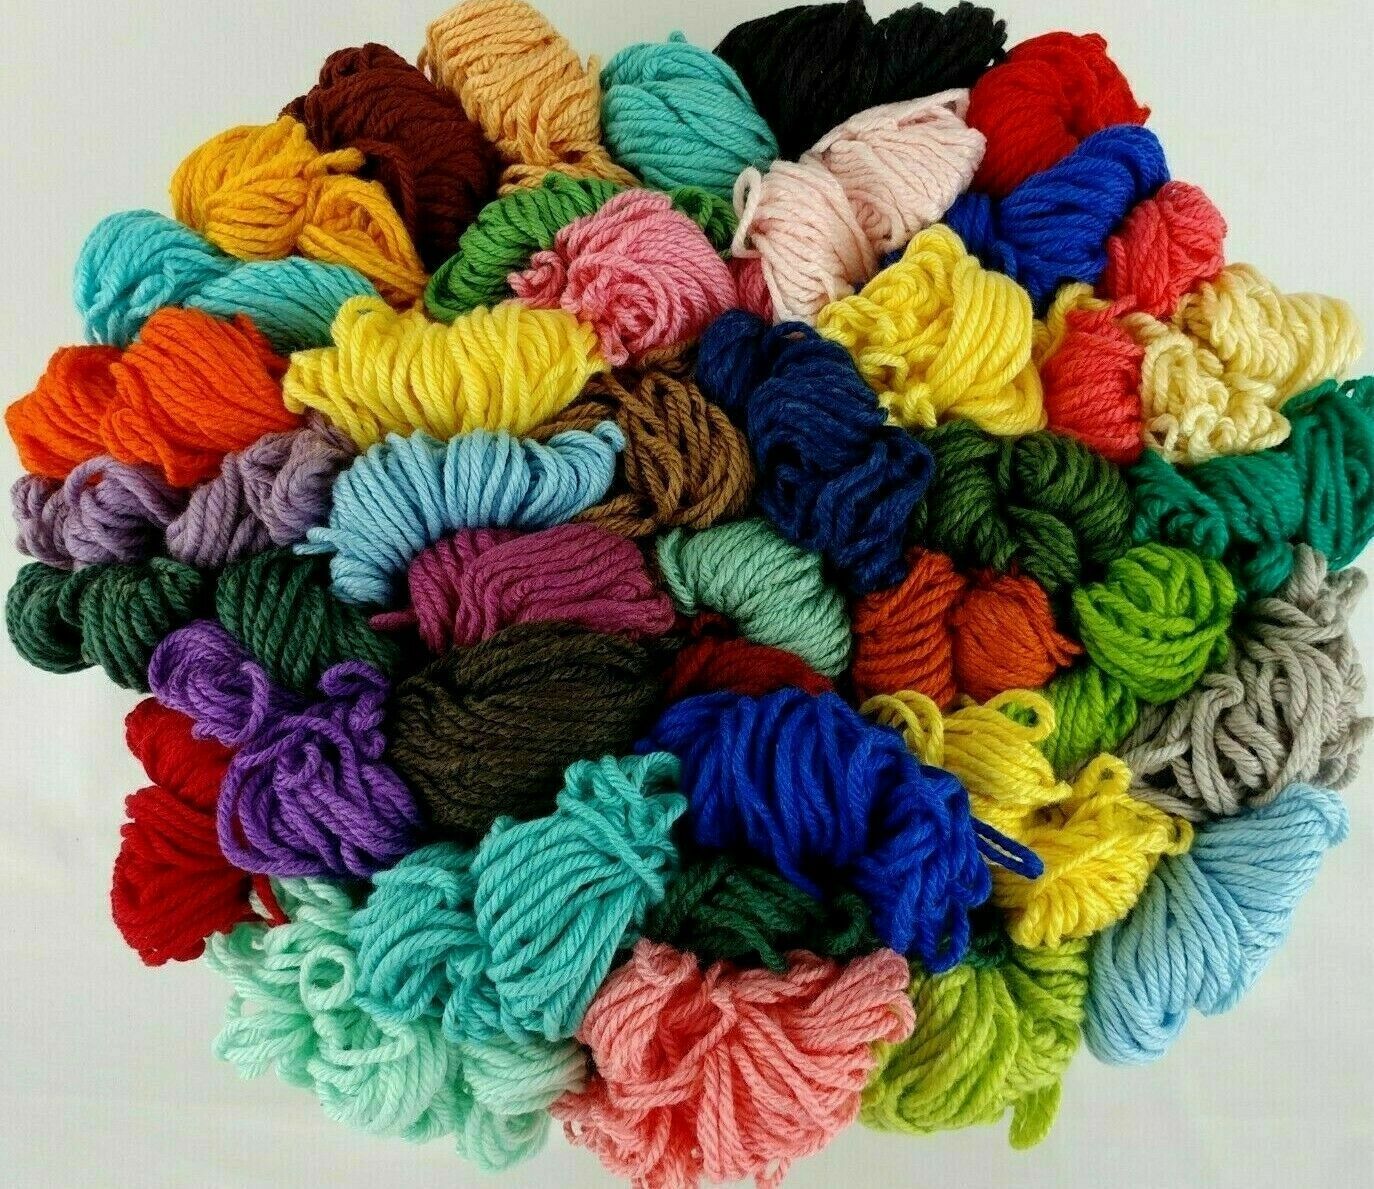 Aunt Lydias Heavy Rug Yarn 55 COLORS 70-180 YD Skeins Rayon Cotton Vtg You Pick - $4.50 - $25.95